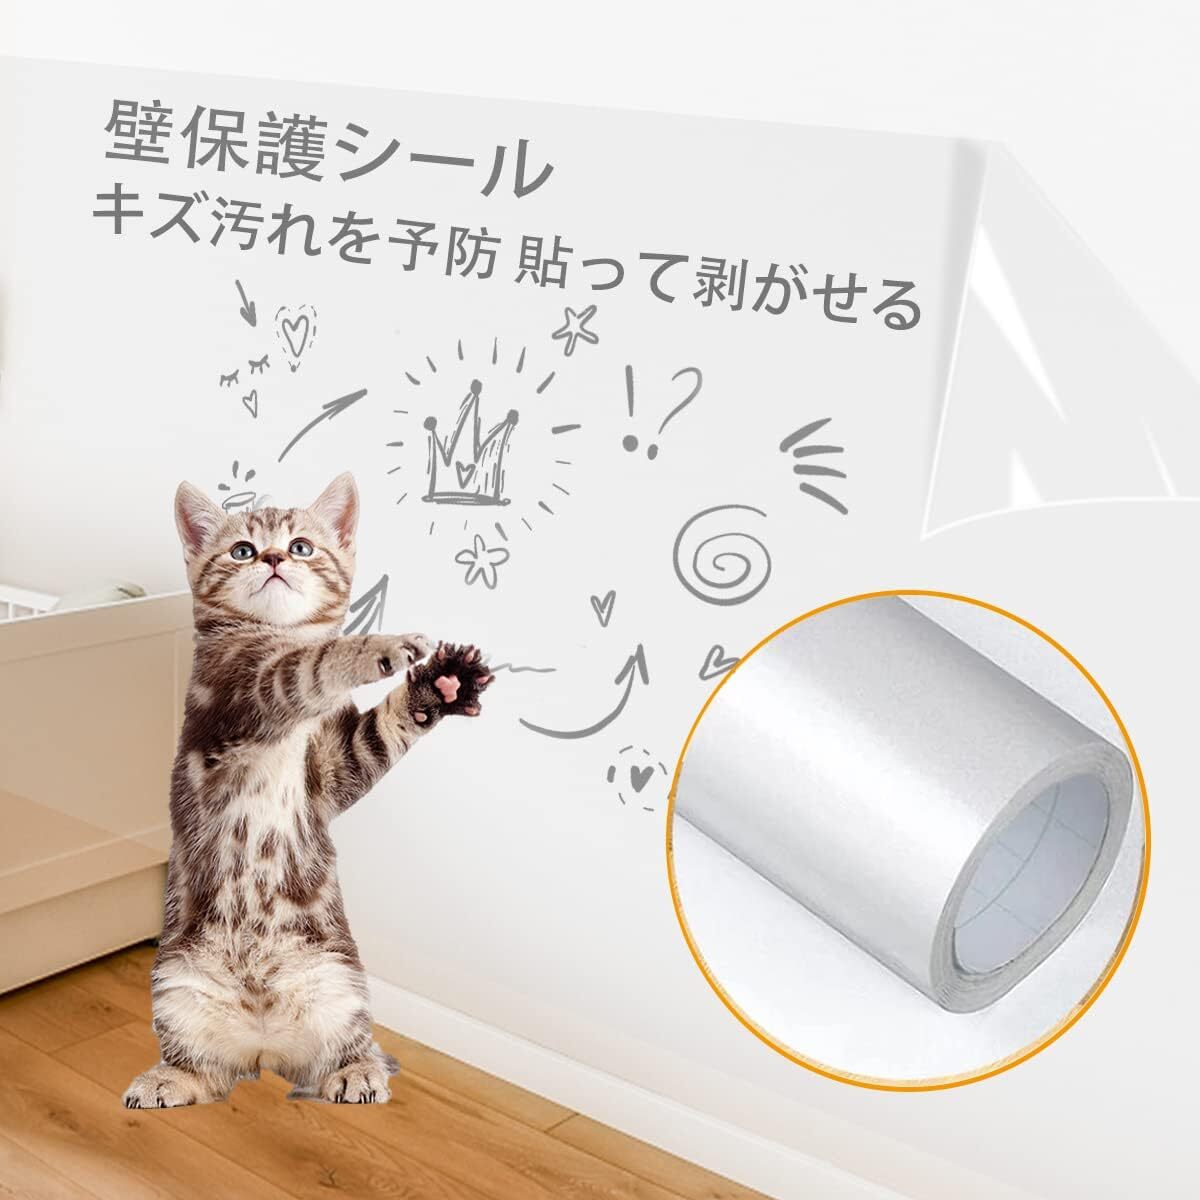 60cm×10m cat wallpaper protection seat 60cm×10m[ is ... transparent ] remarkable difficult strengthen material trout eyes entering wallpaper seal nail .. prevention si